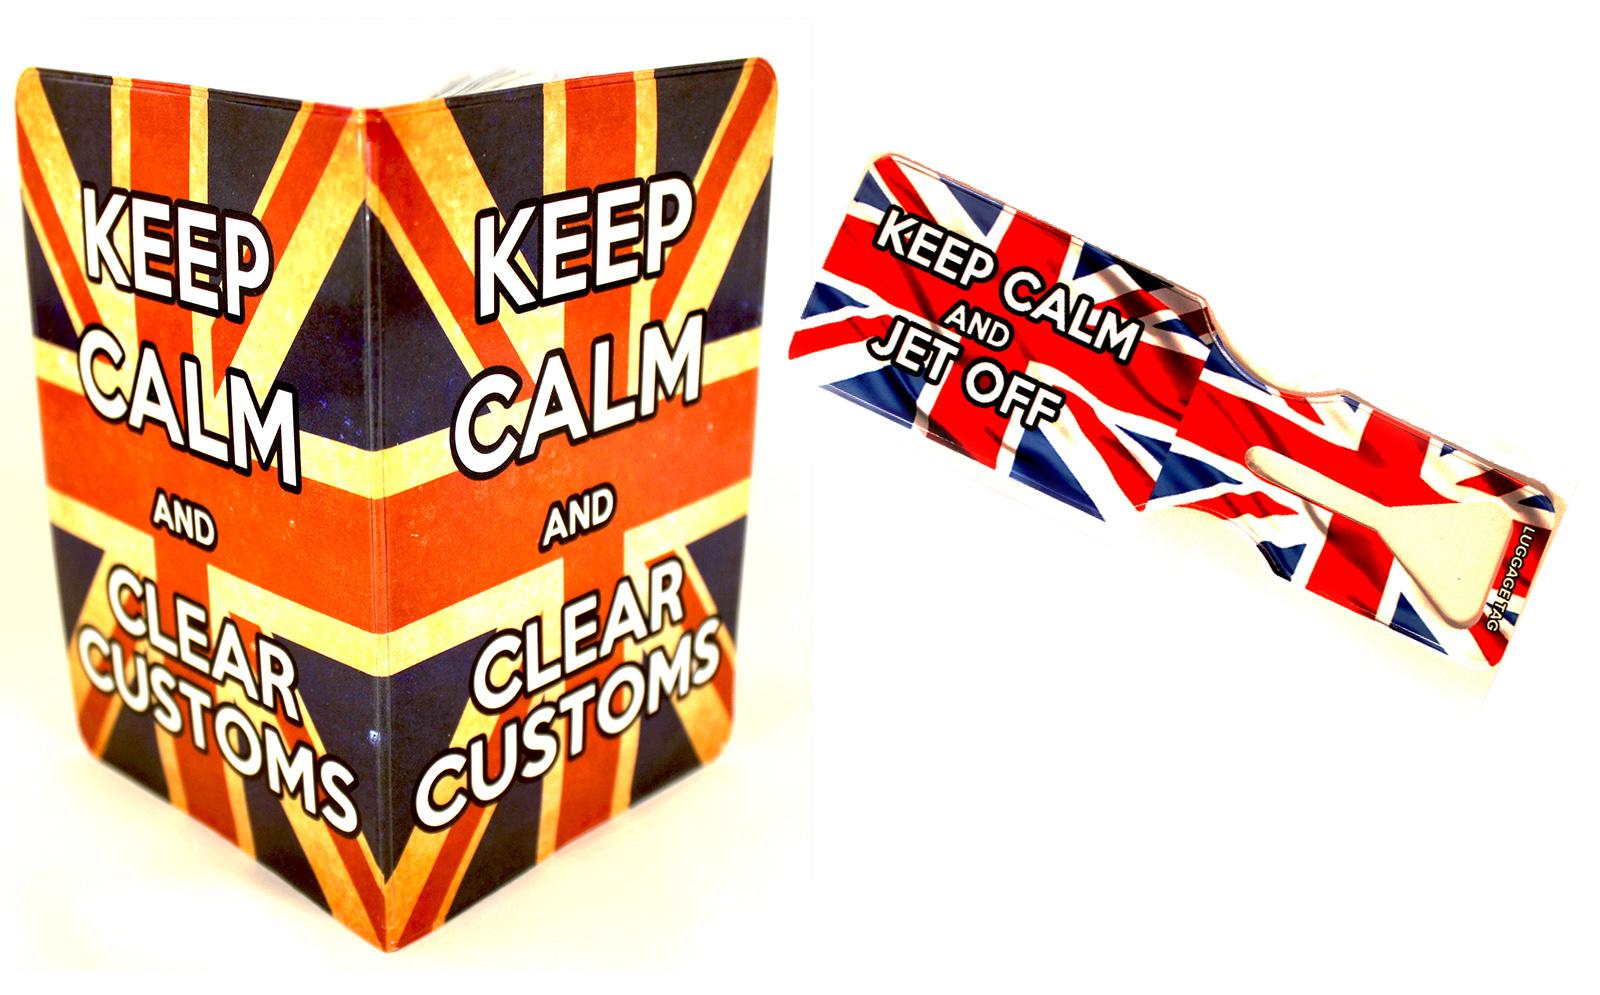 Keep Calm Union Jack Passport Cover and Luggage Tag Set